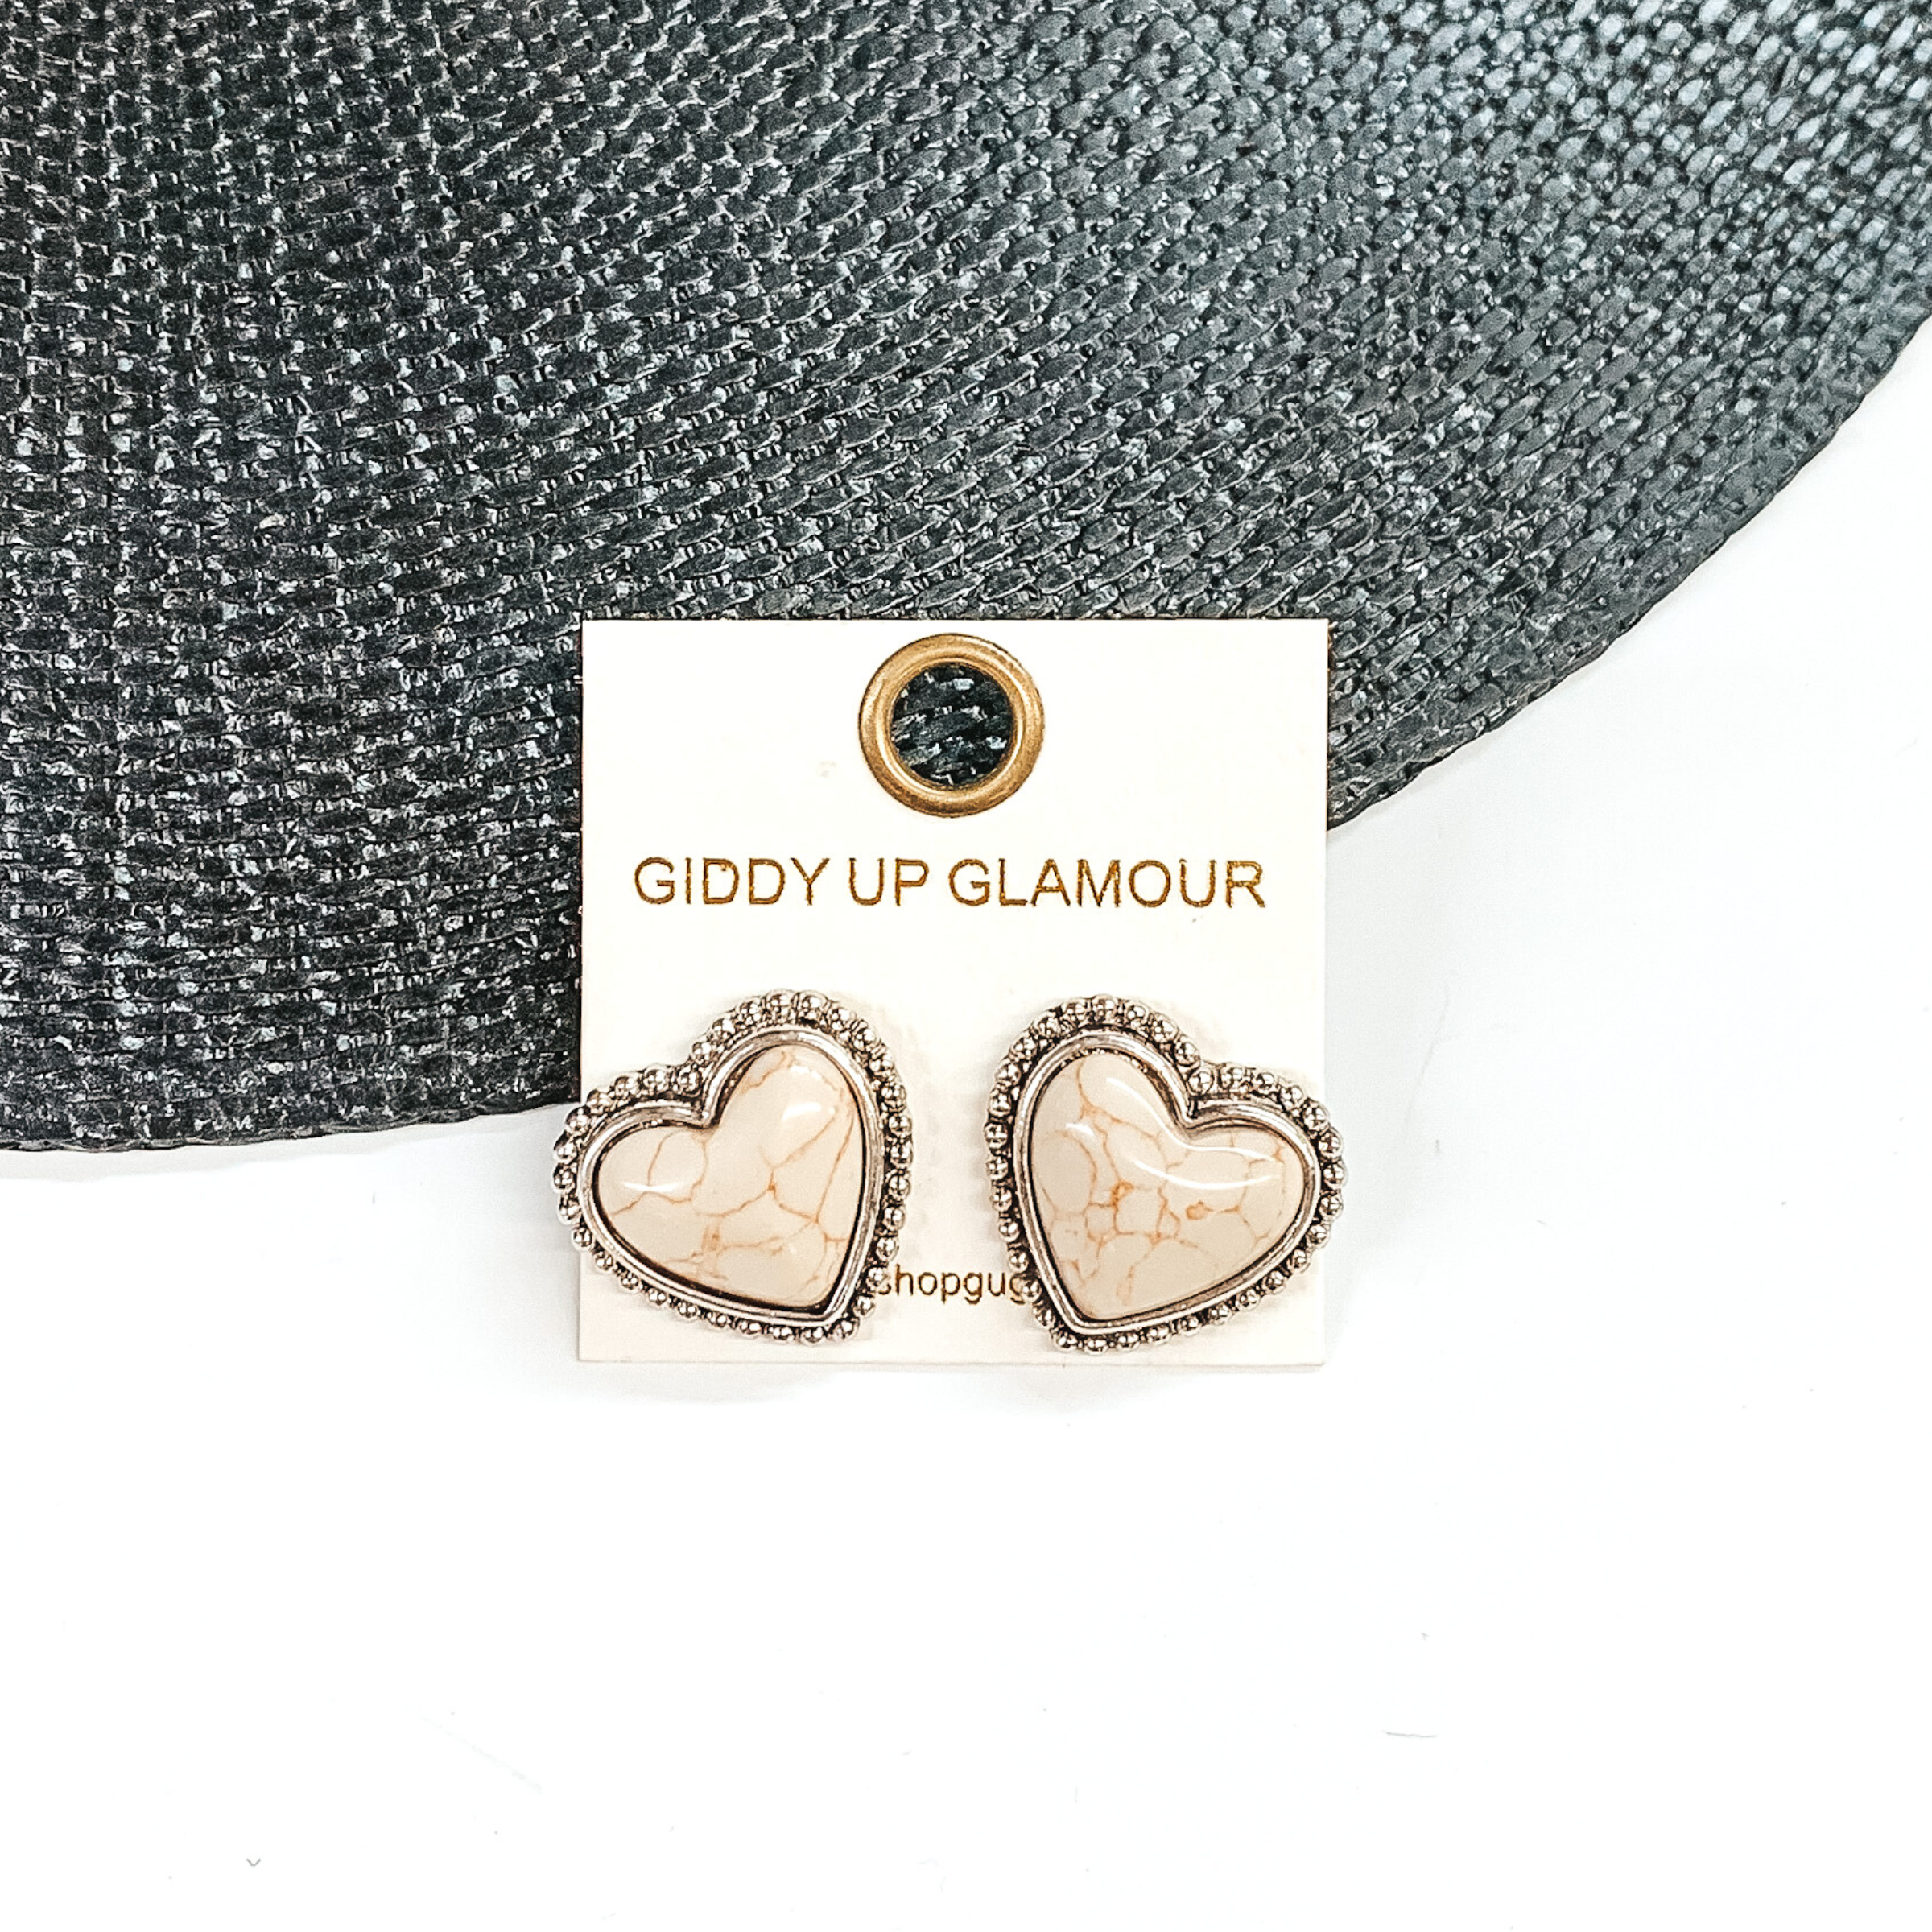 Ivory, heart stone earrings with a silver backing and outline. These earrings are pictured on a white earrings holder. Then pictured on a white and black background.